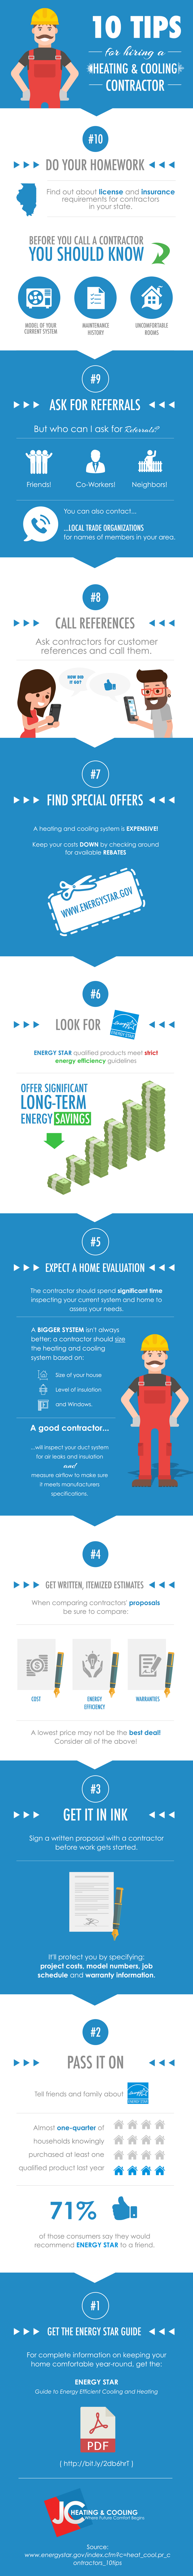 10 Things To Know Before Hiring a HVAC Contractor